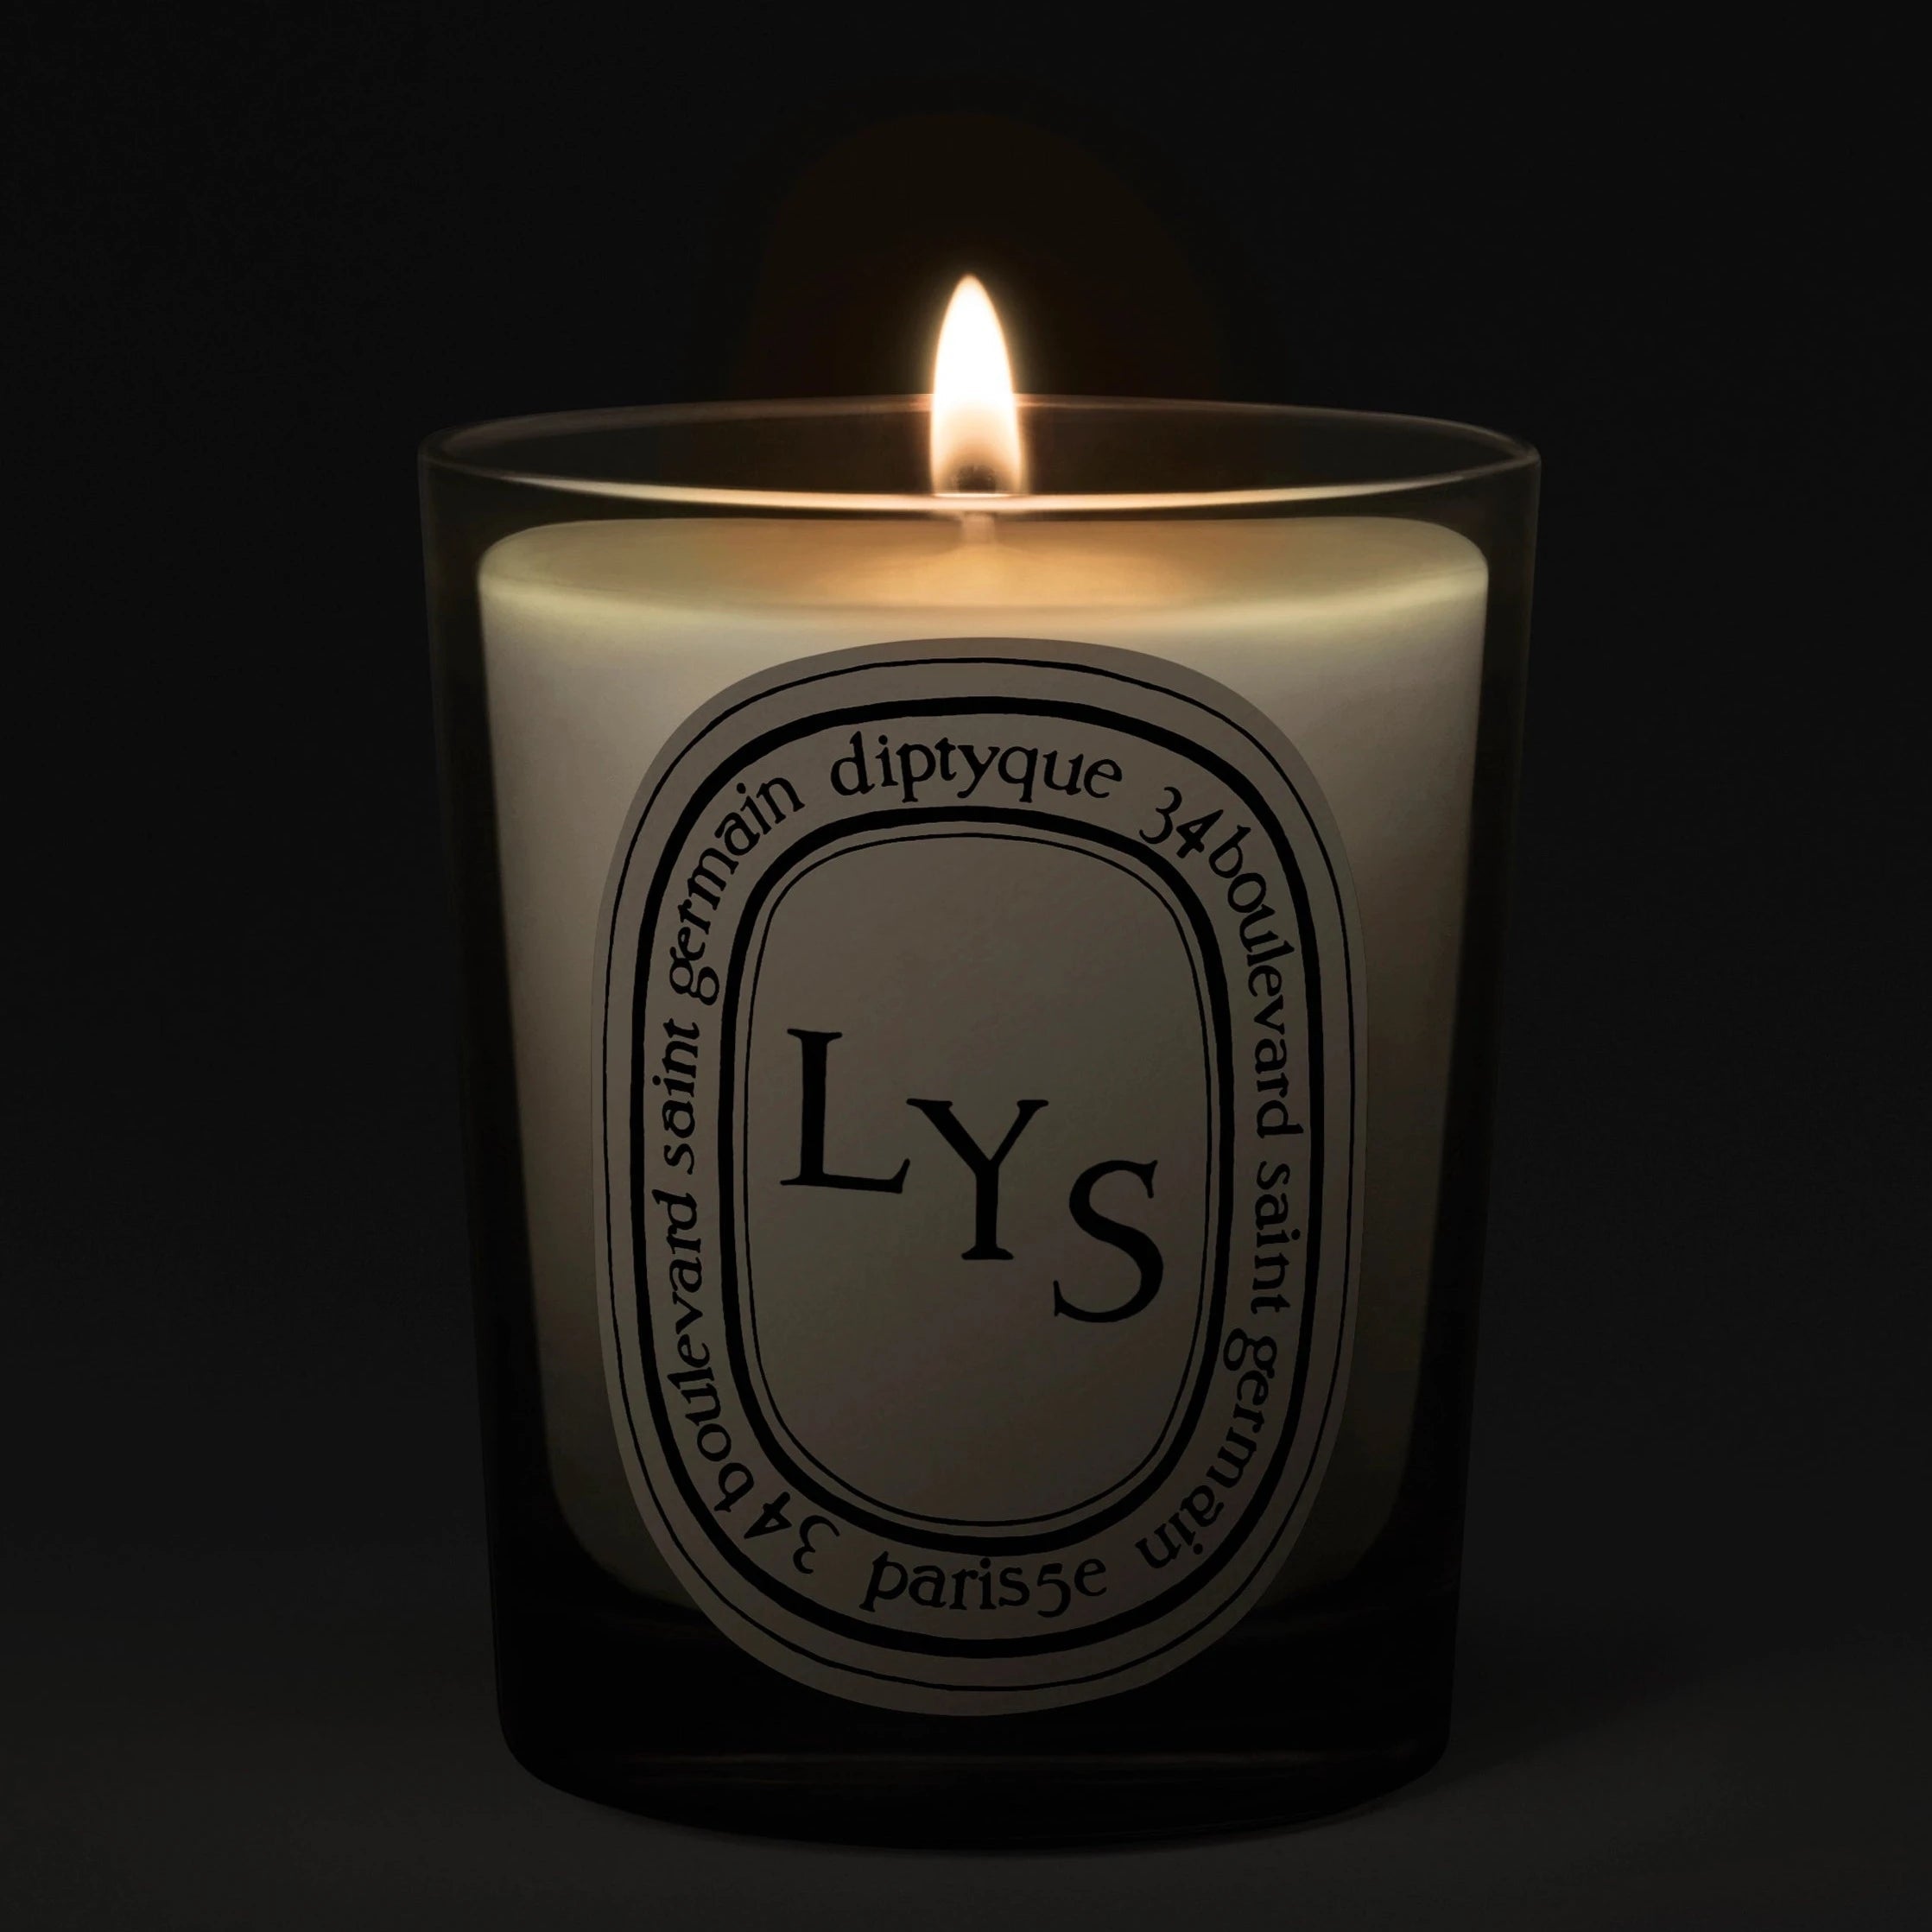 Diptyque Lys Scented Candle | My Perfume Shop Australia